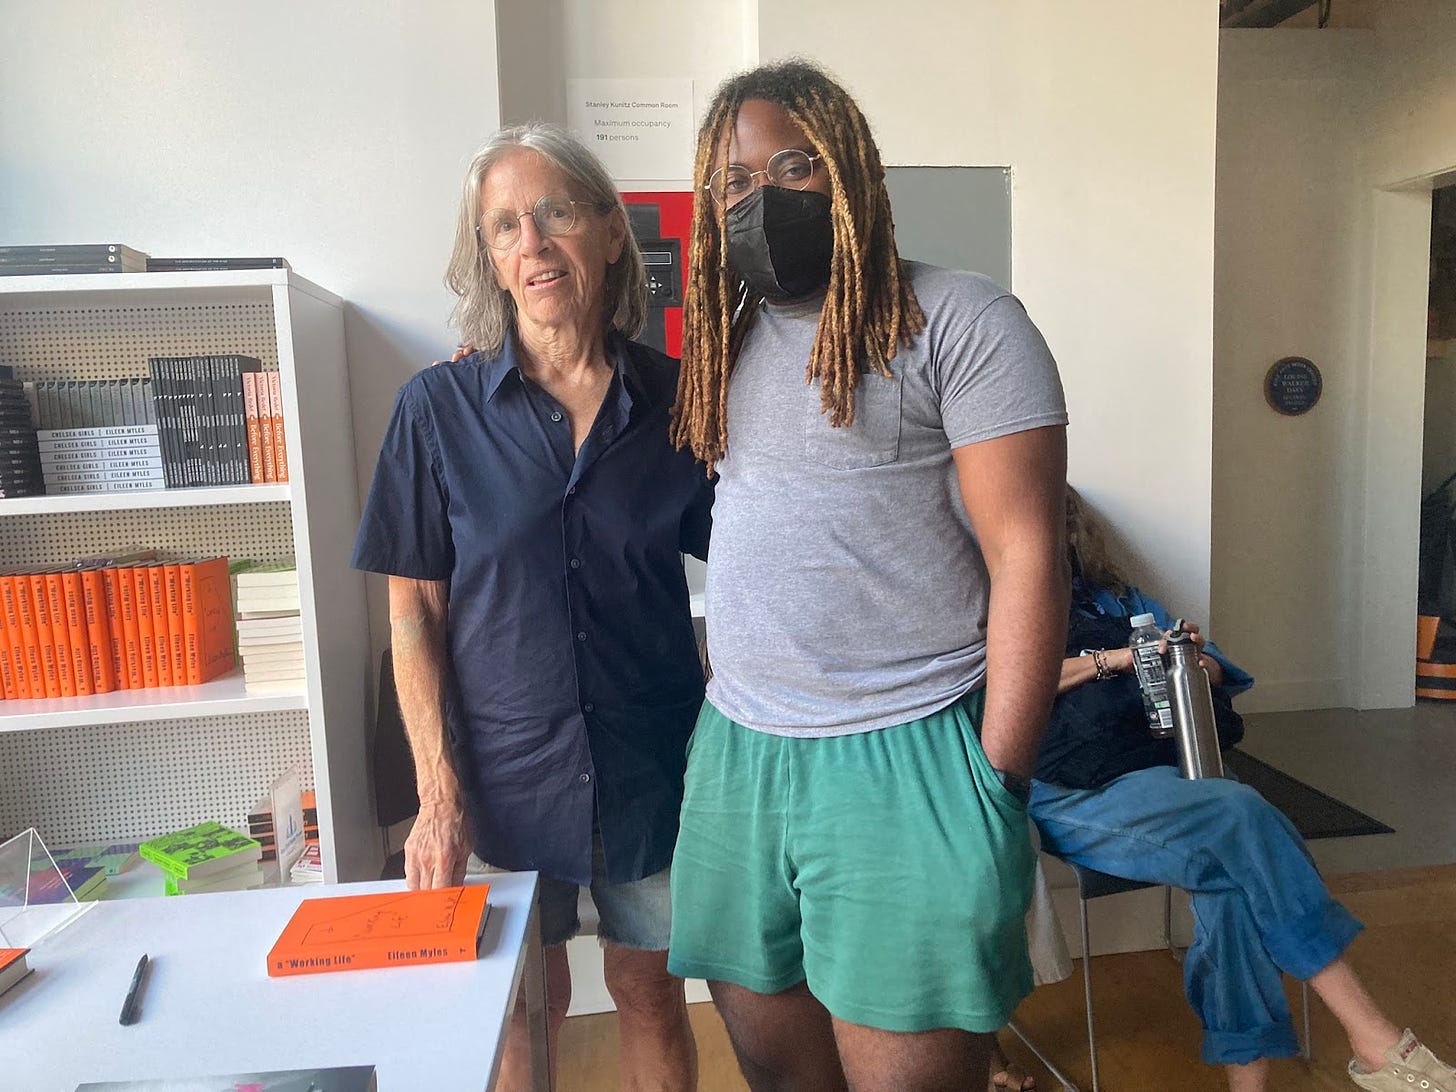 Image of KB and Eileen Myles, looking at the camera.